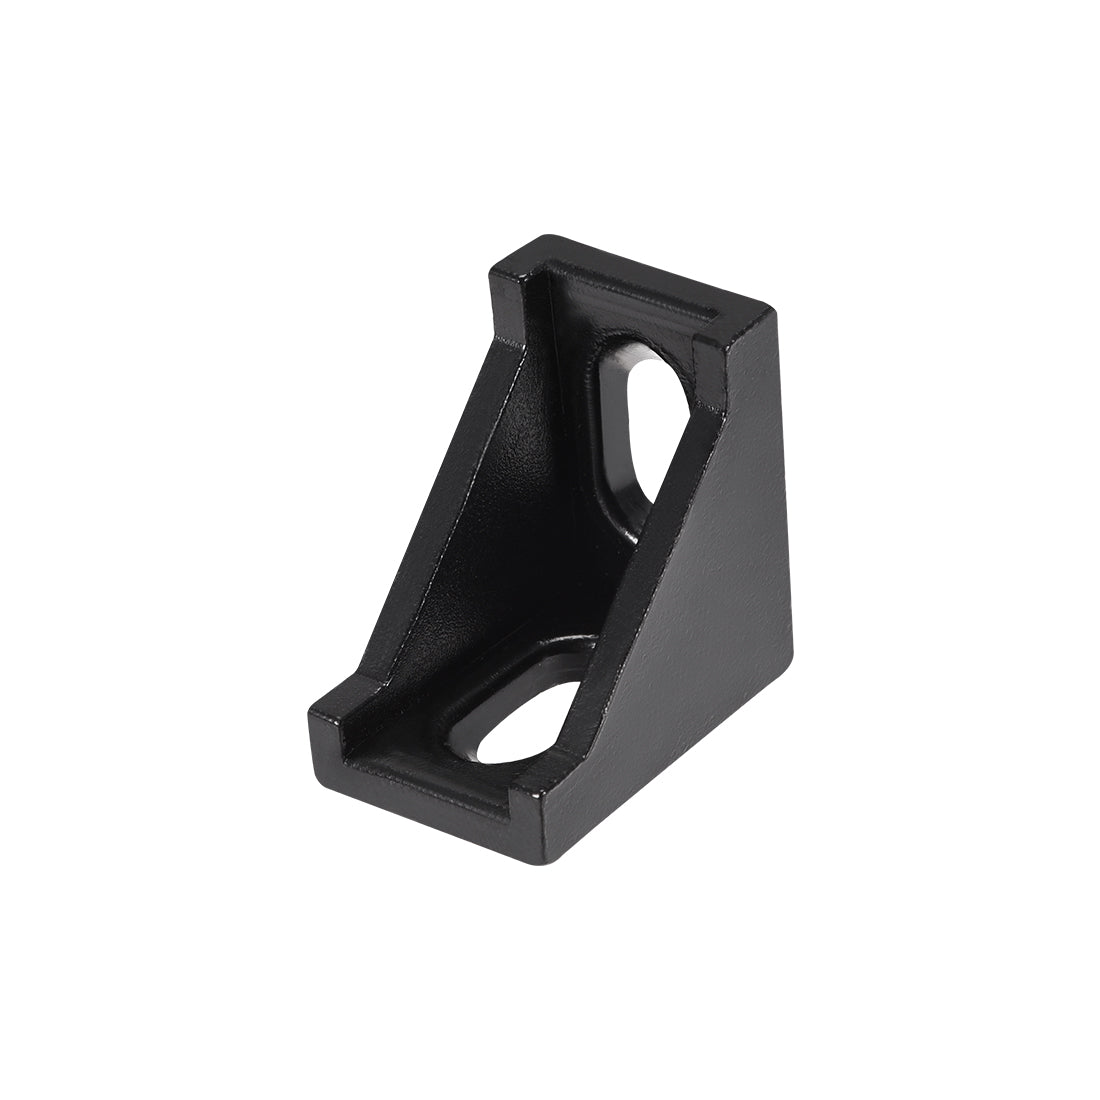 Uxcell Uxcell Inside Corner Bracket Gusset, 35mm x 35mm for 3030 Series Aluminum Extrusion Profile with Slot 8mm, 4 Pcs (Black)